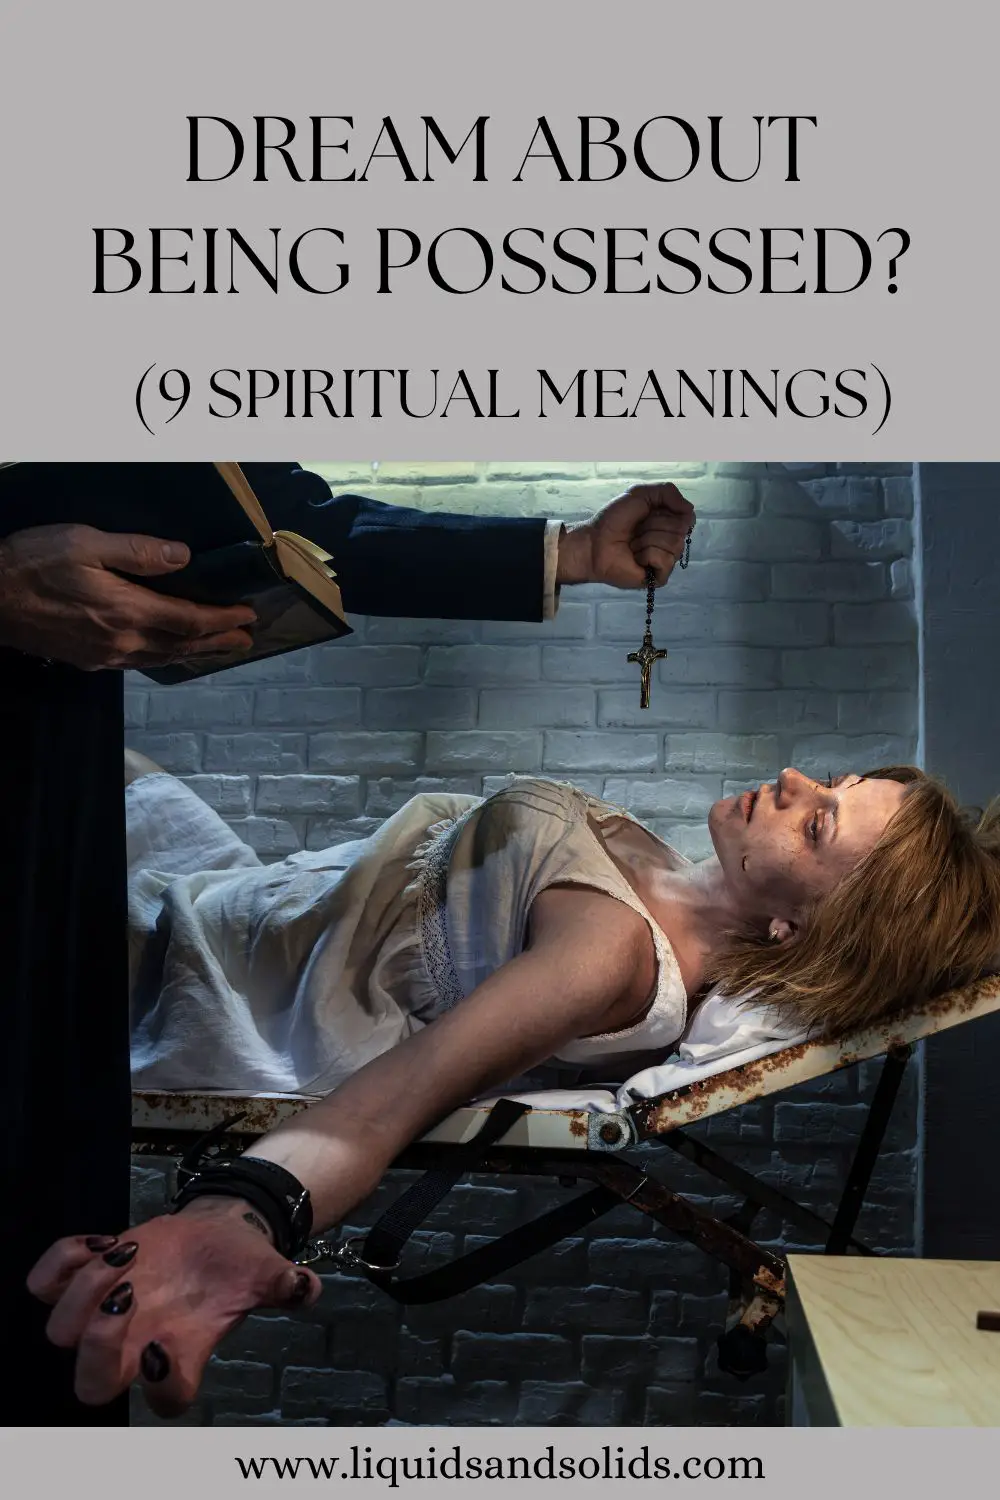 Possible Causes Of Dreams Of Being Possessed